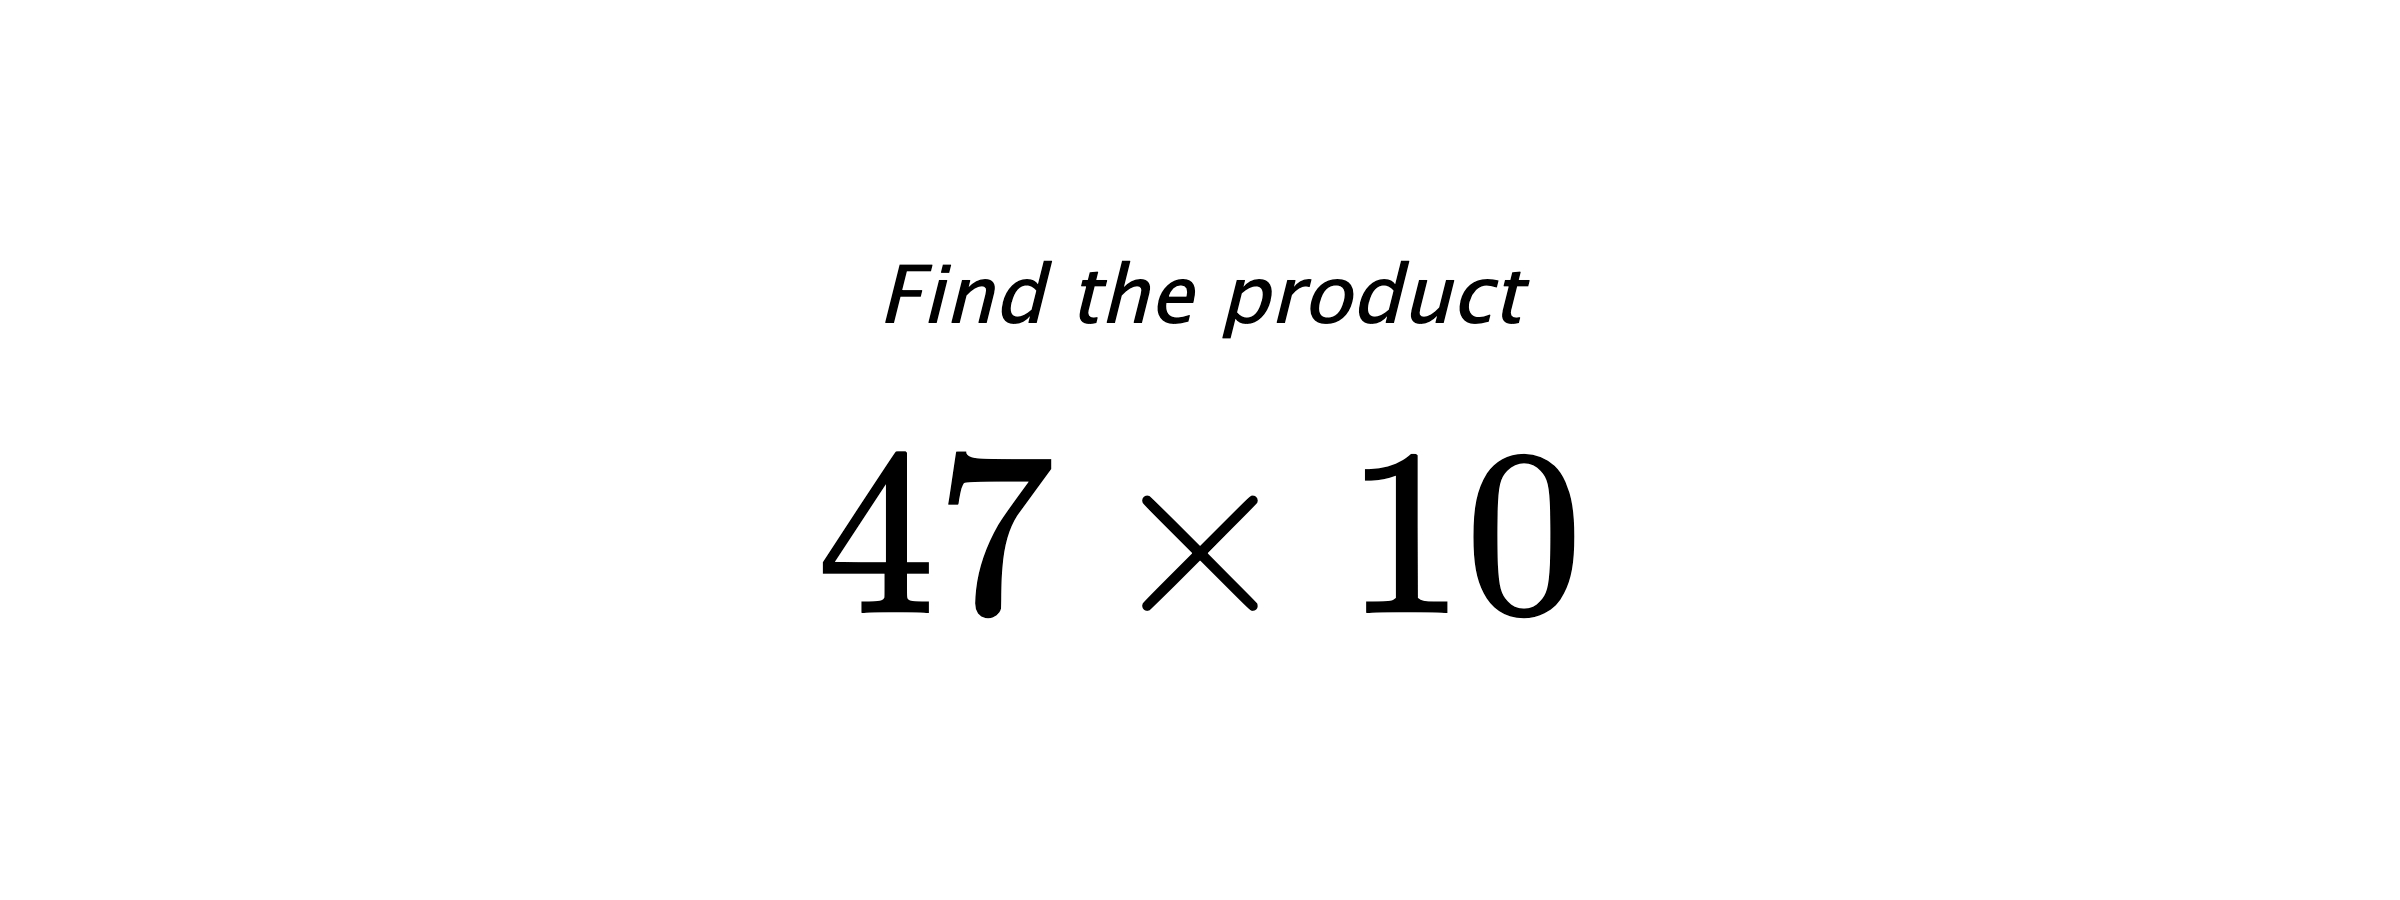 Find the product $ 47 \times 10 $